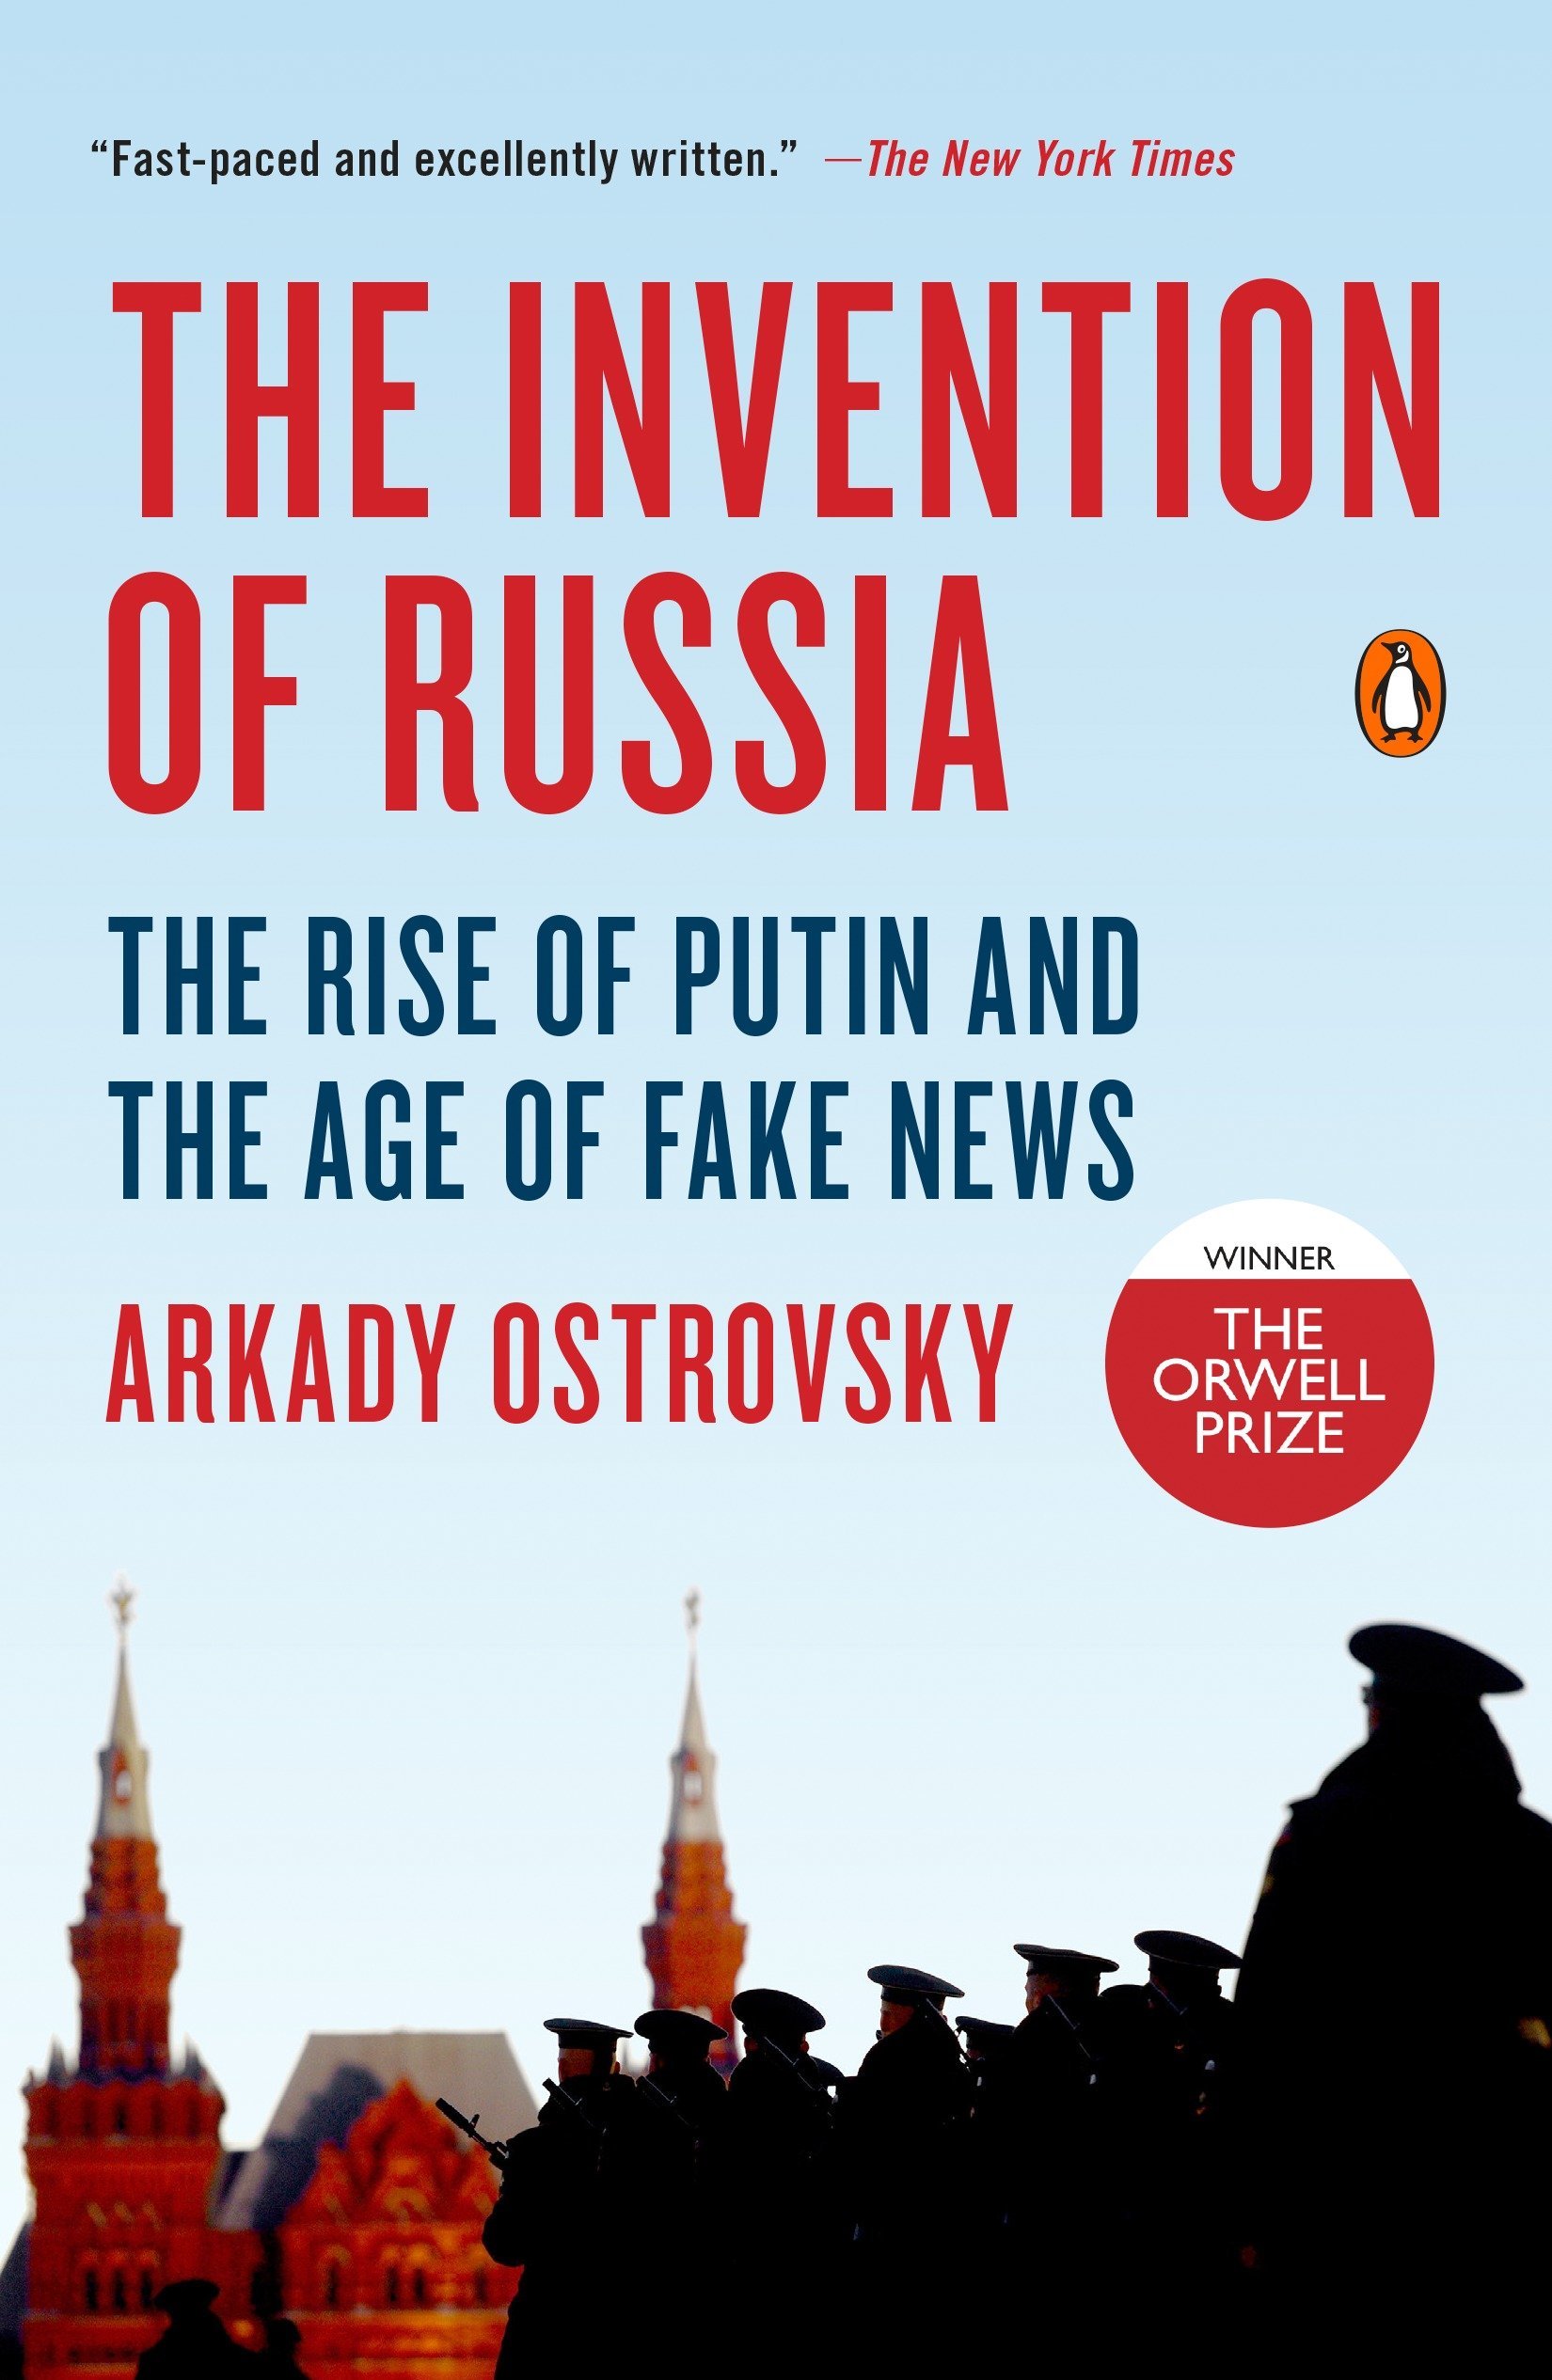 The Invention of Russia (book cover)